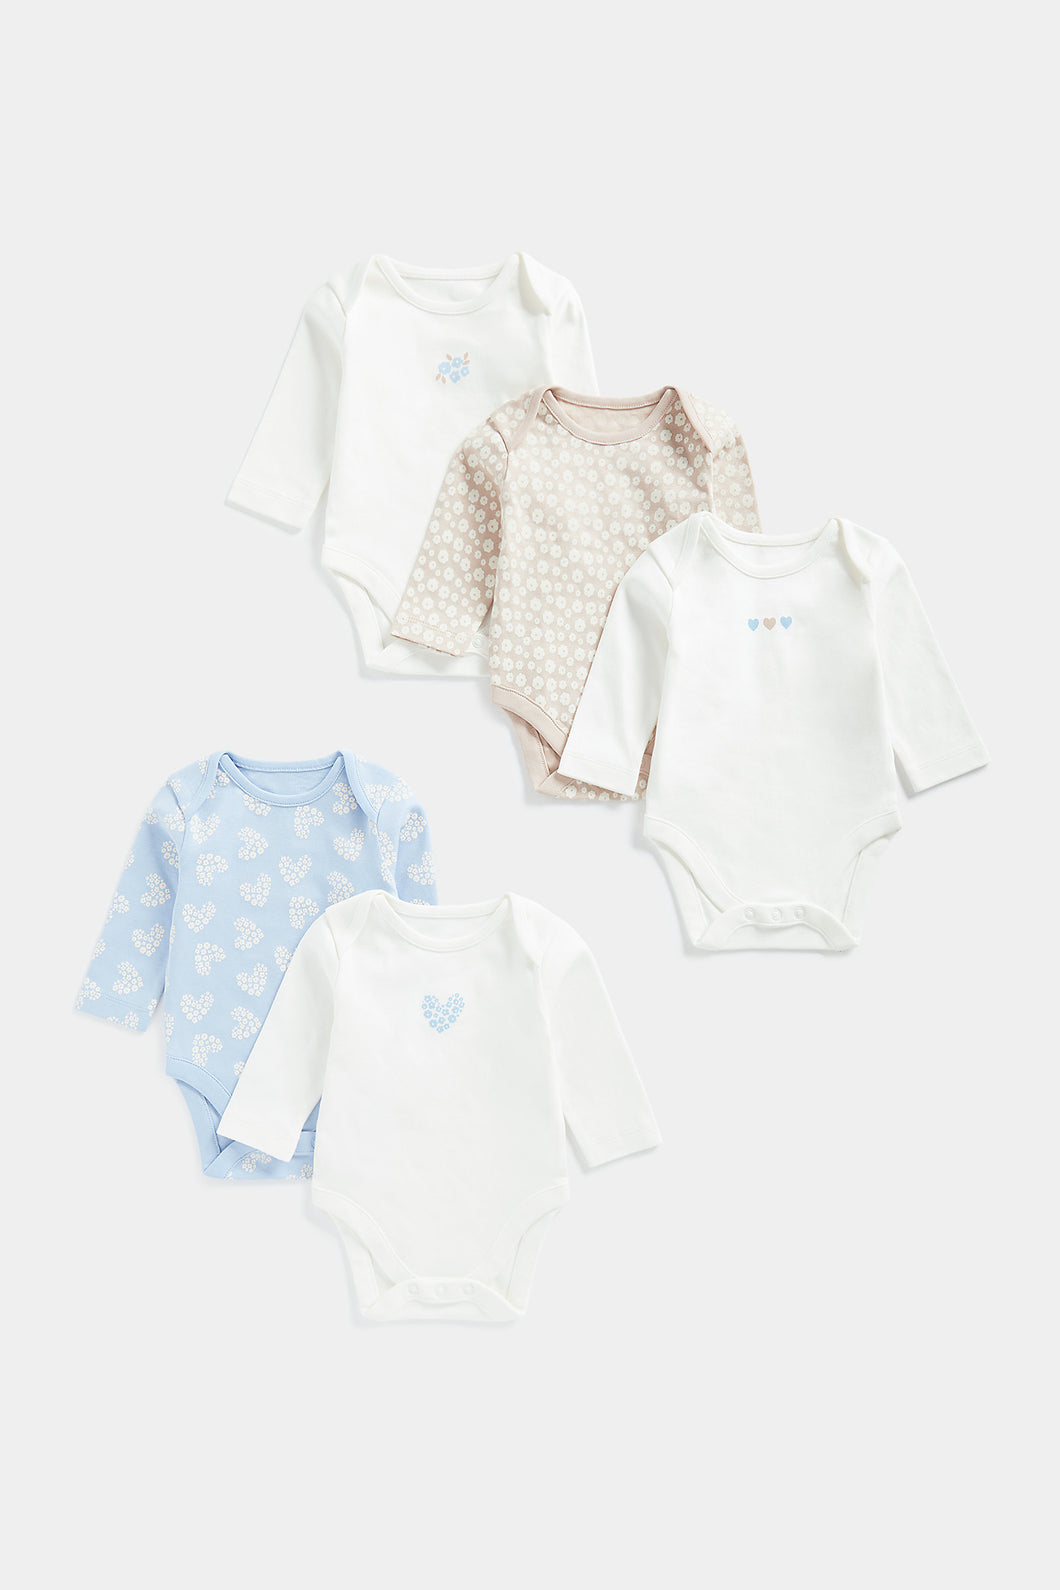 Mothercare Floral Heart Long-Sleeved Baby Bodysuits - 5 Pack